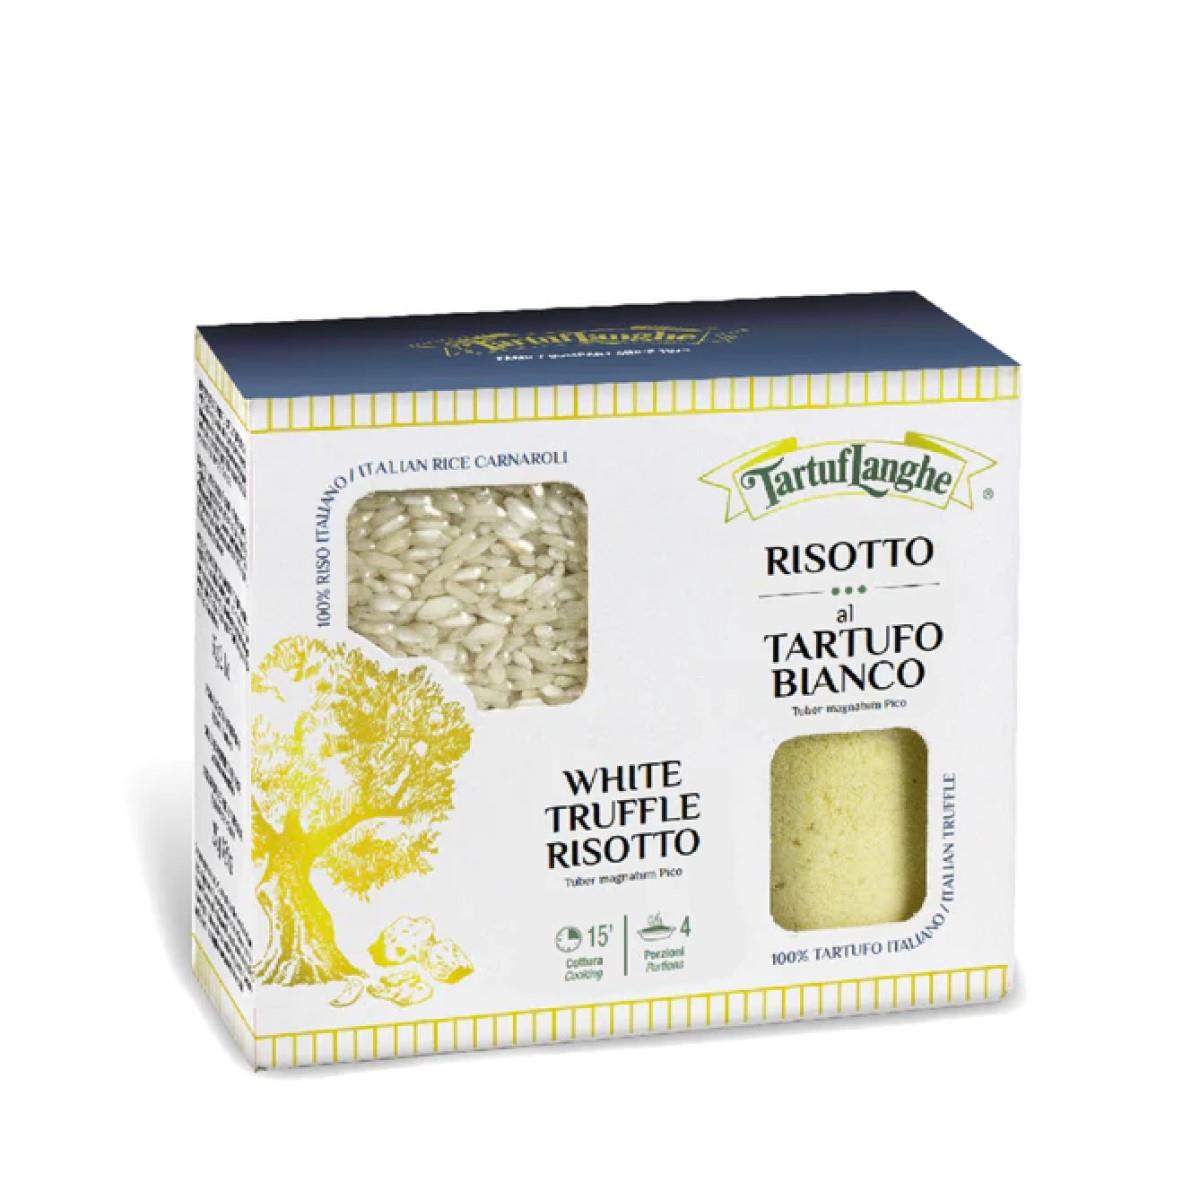 Ready-made Risotto with White Truffle - 250 g + 60 g